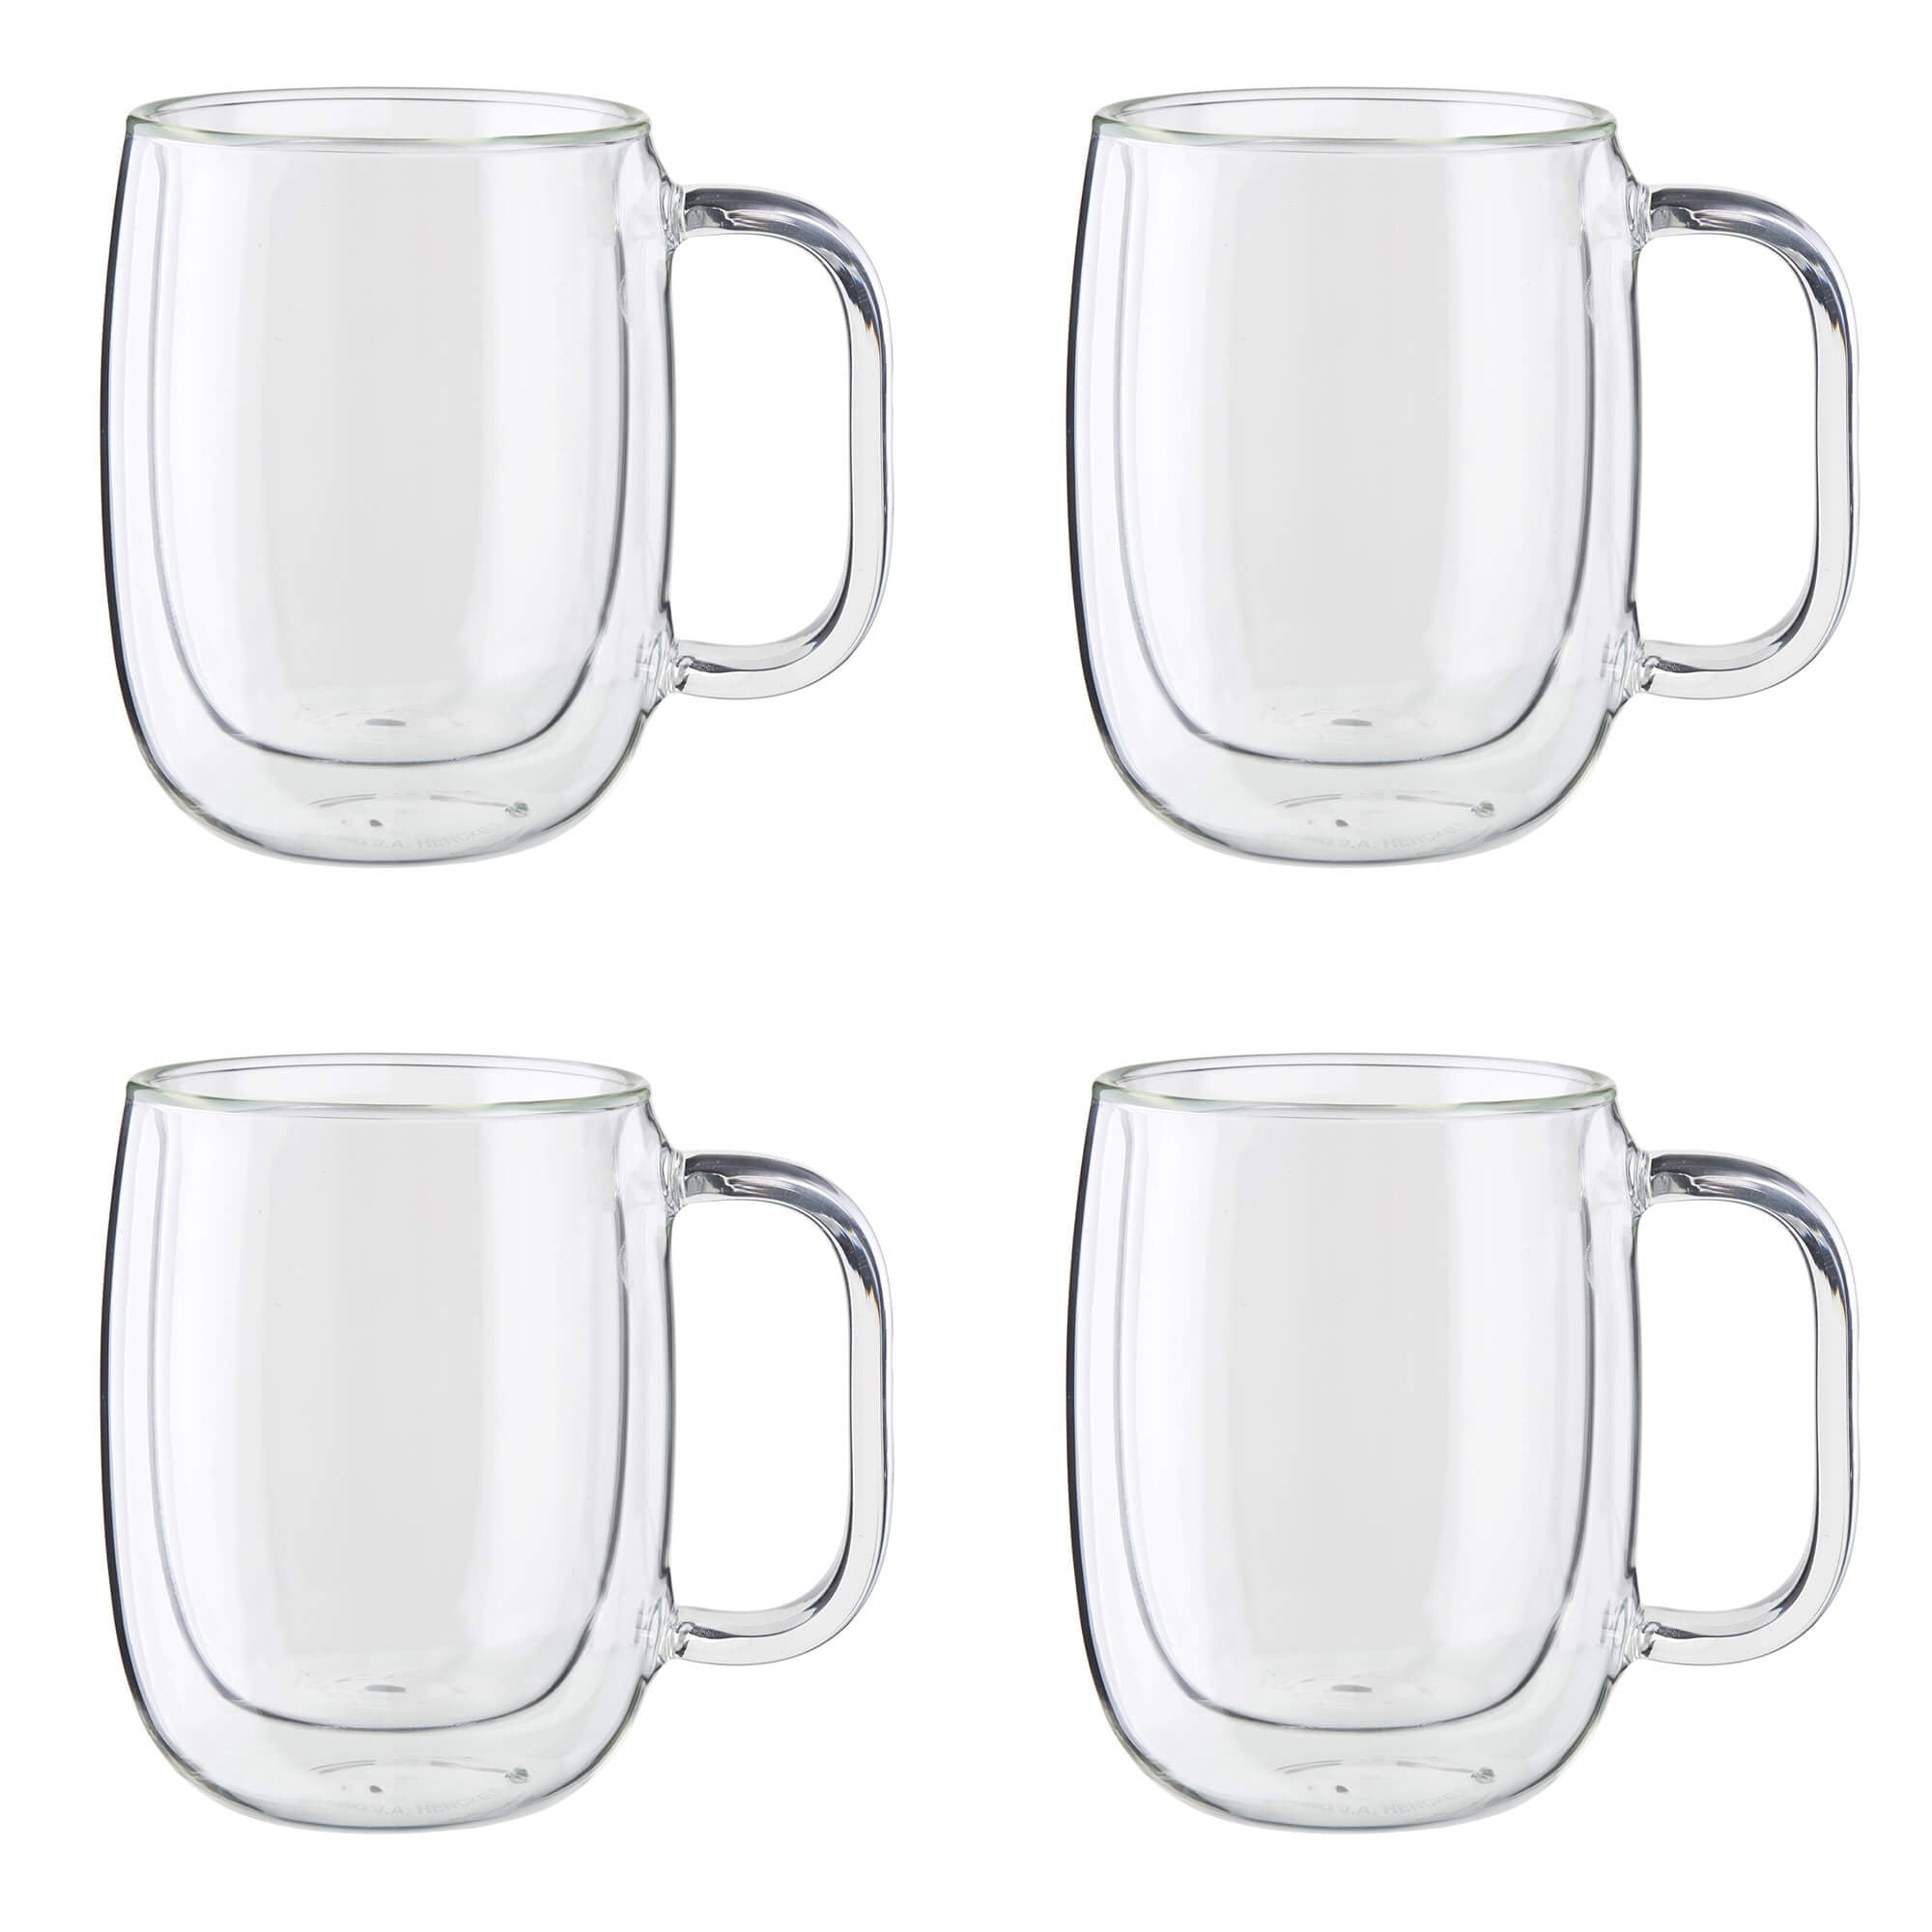 Sweese Double Walled Coffee Mugs - 12.5 oz Clear Coffee Mugs, Glass, Set of  4, Perfect for Cappuccin…See more Sweese Double Walled Coffee Mugs - 12.5